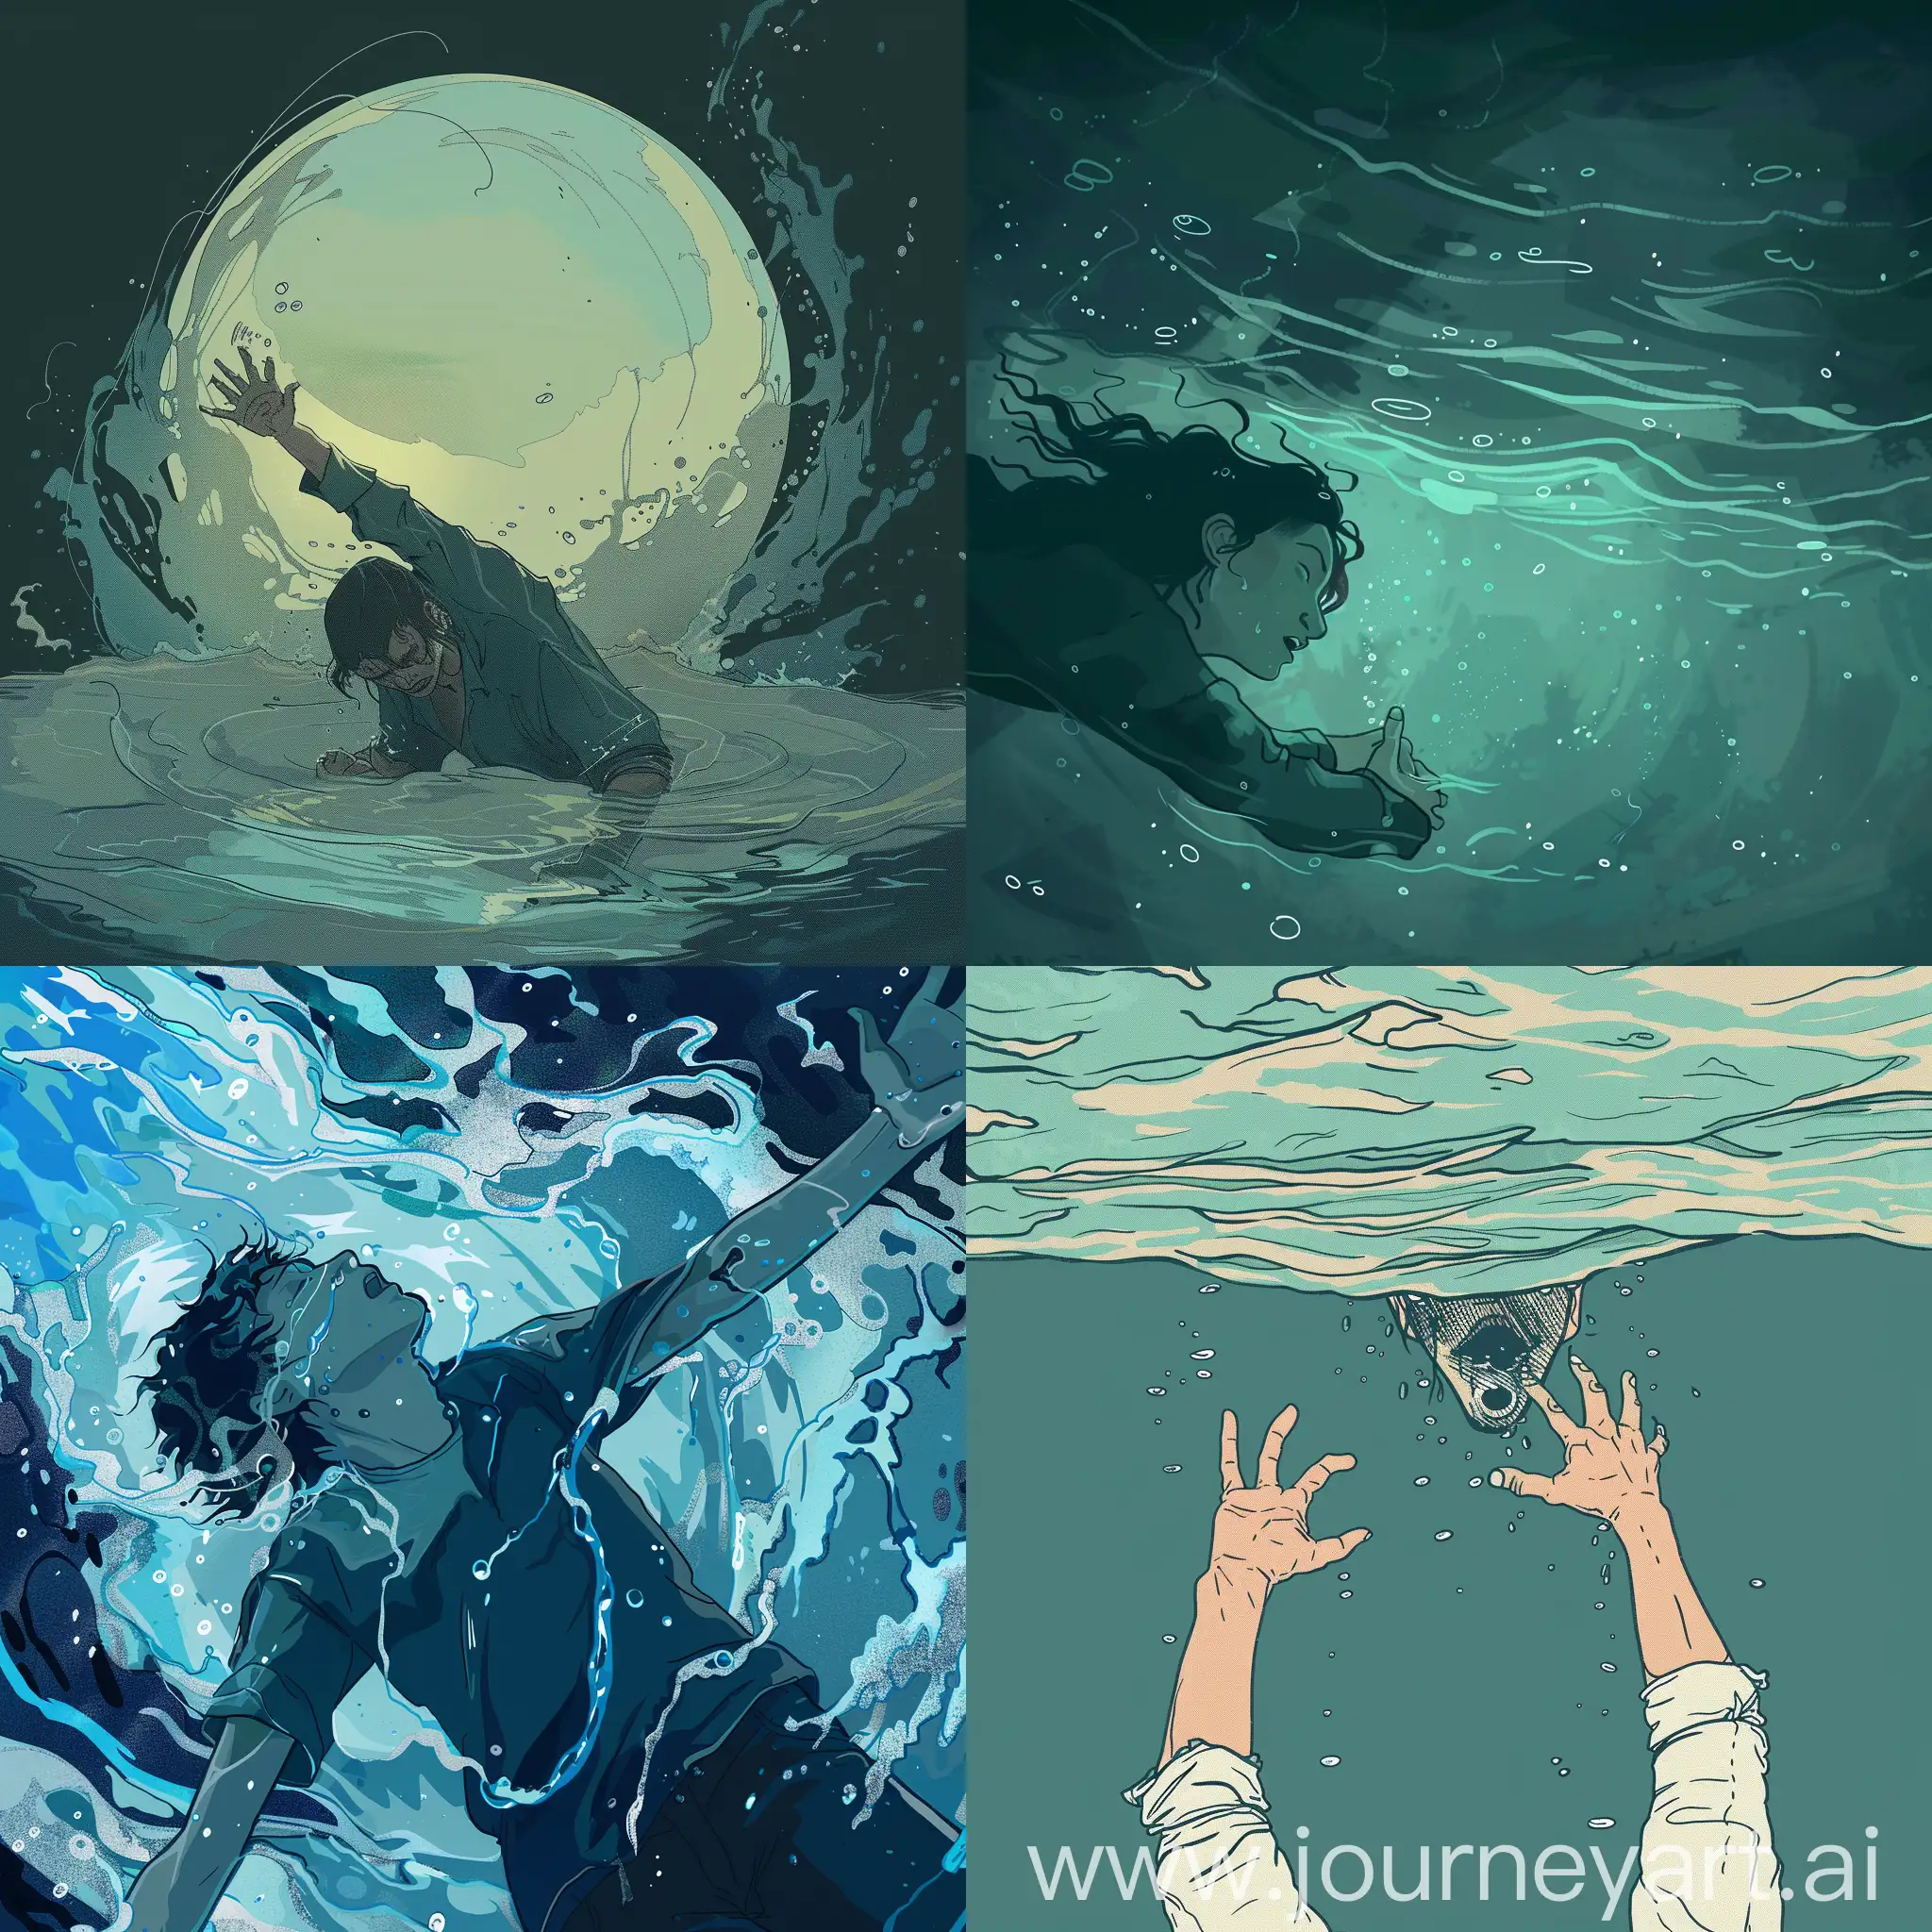 Struggle-Against-the-Depths-Digital-Illustration-of-a-Person-Resisting-Drowning